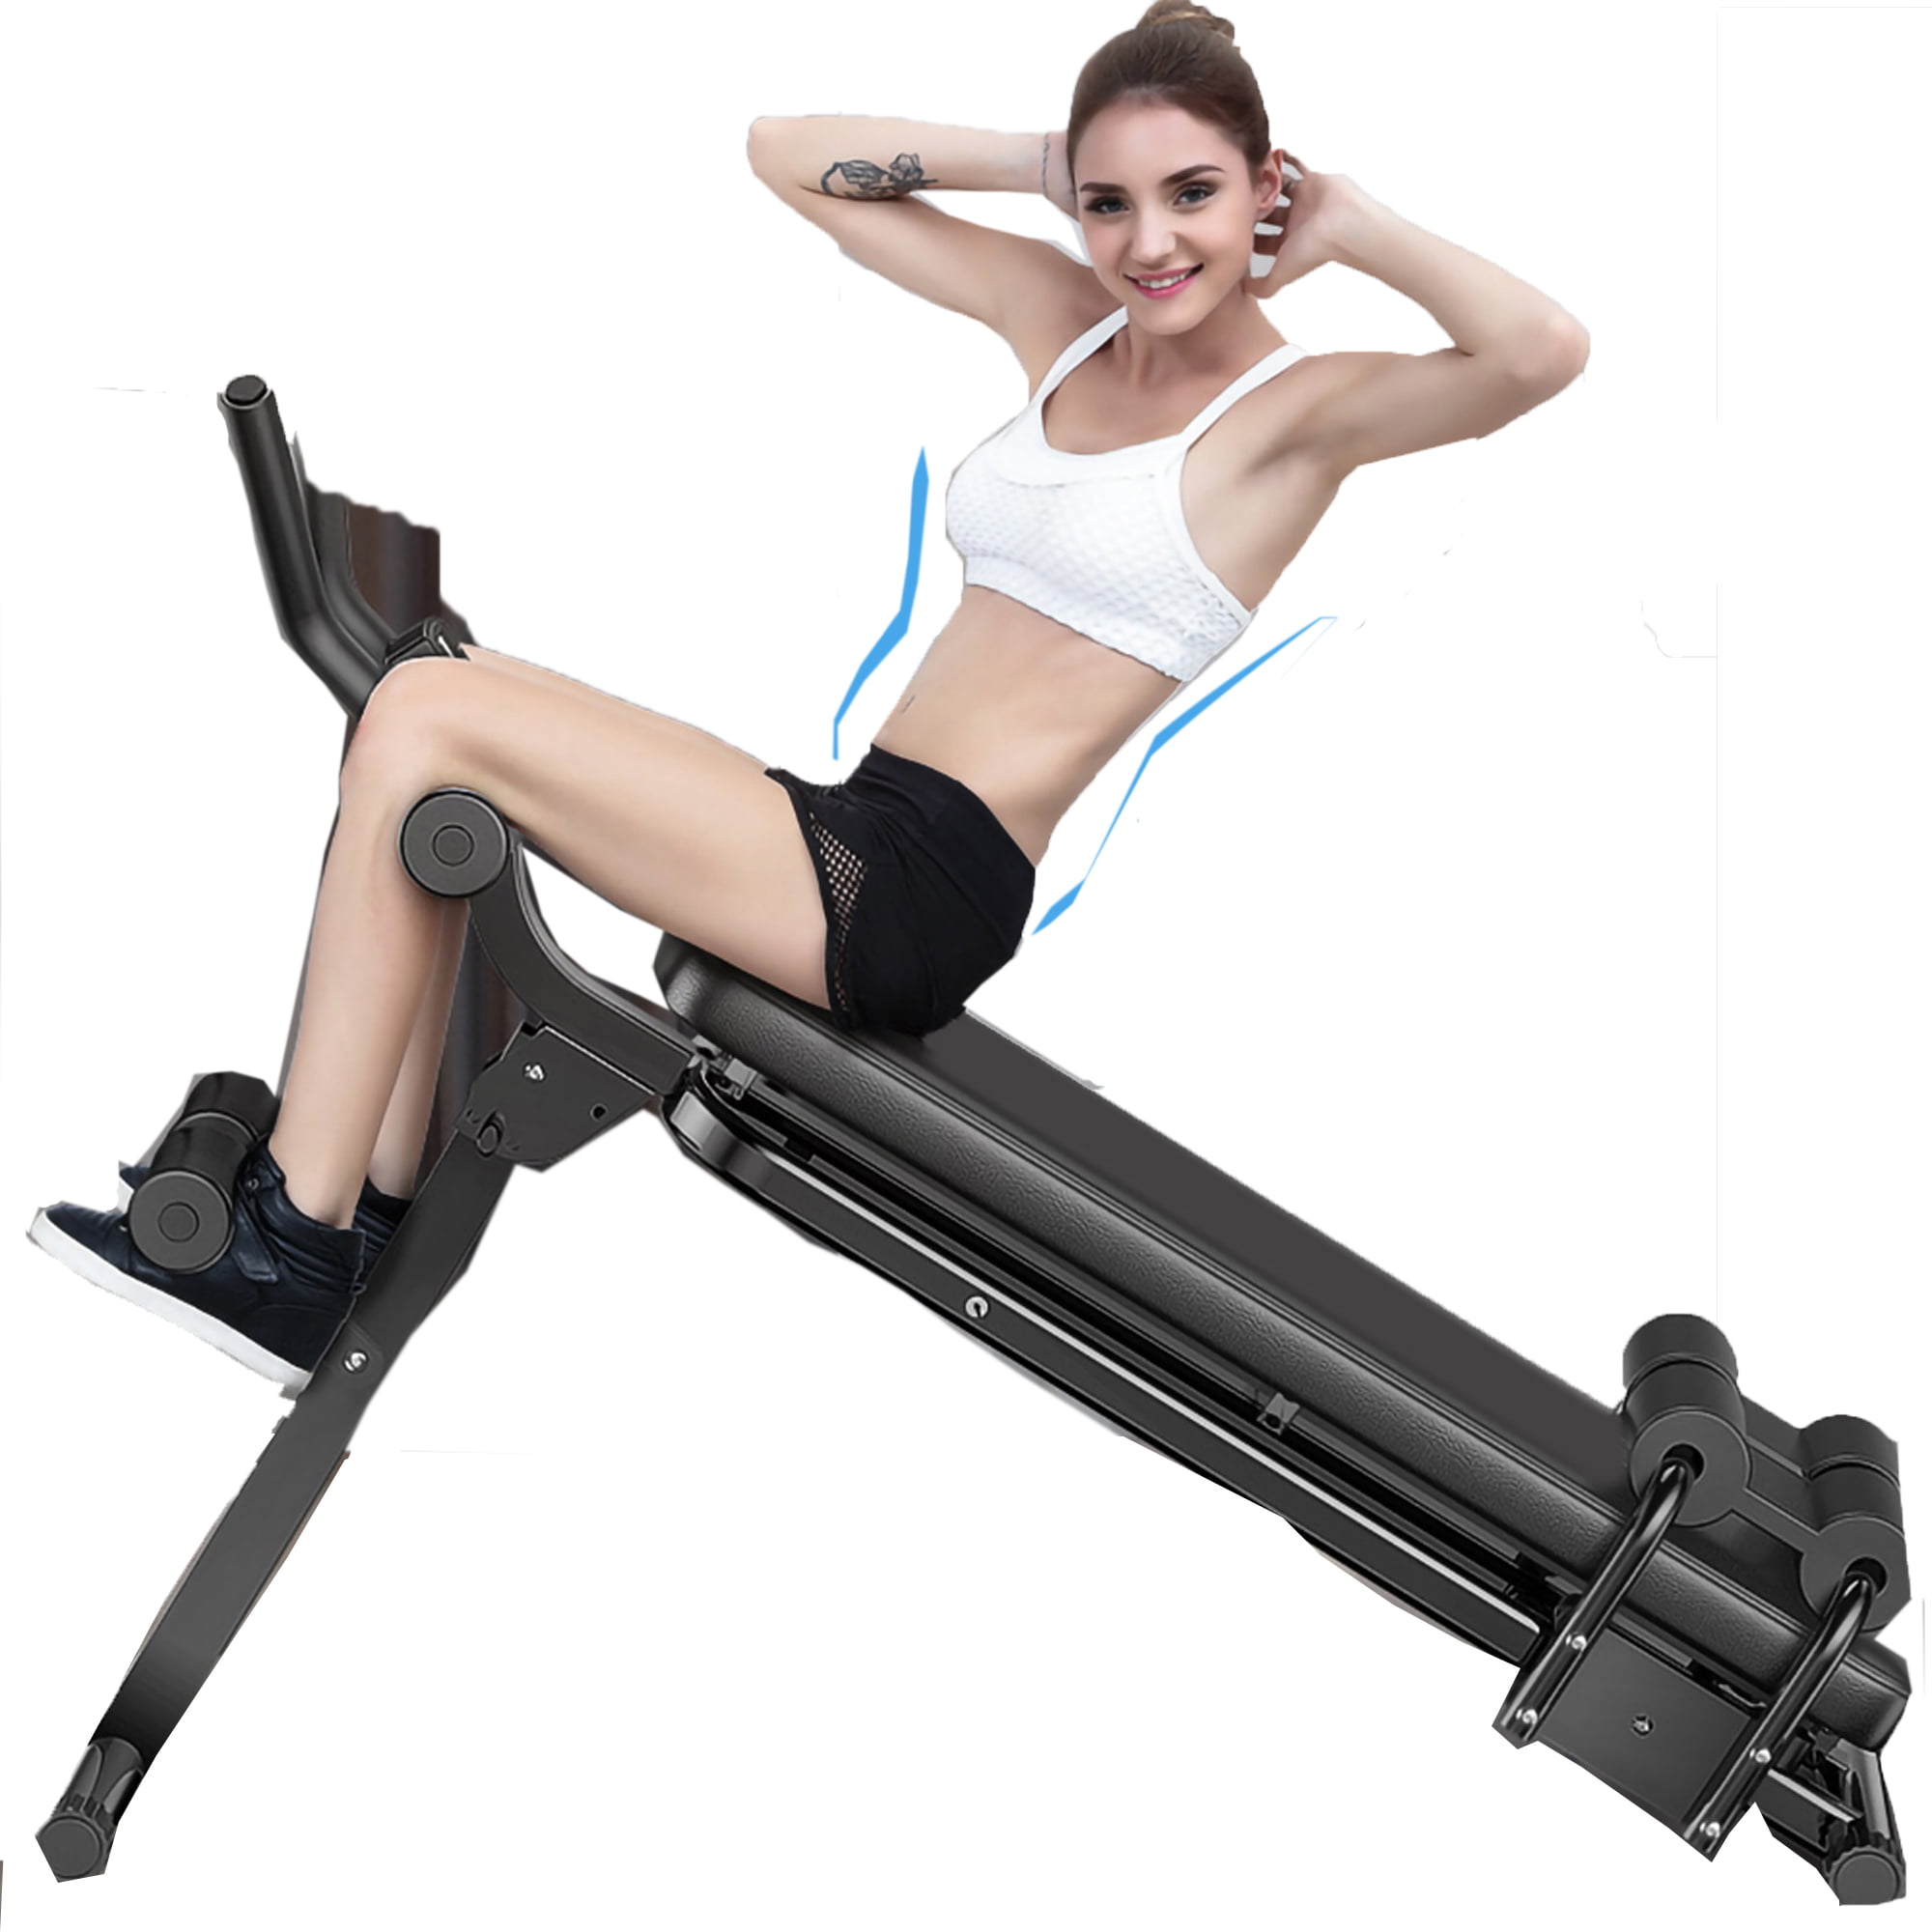 Details about   Sit Up Bench Decline Abdominal Fitness Home Gym Exercise Workout Equipment 220LB 